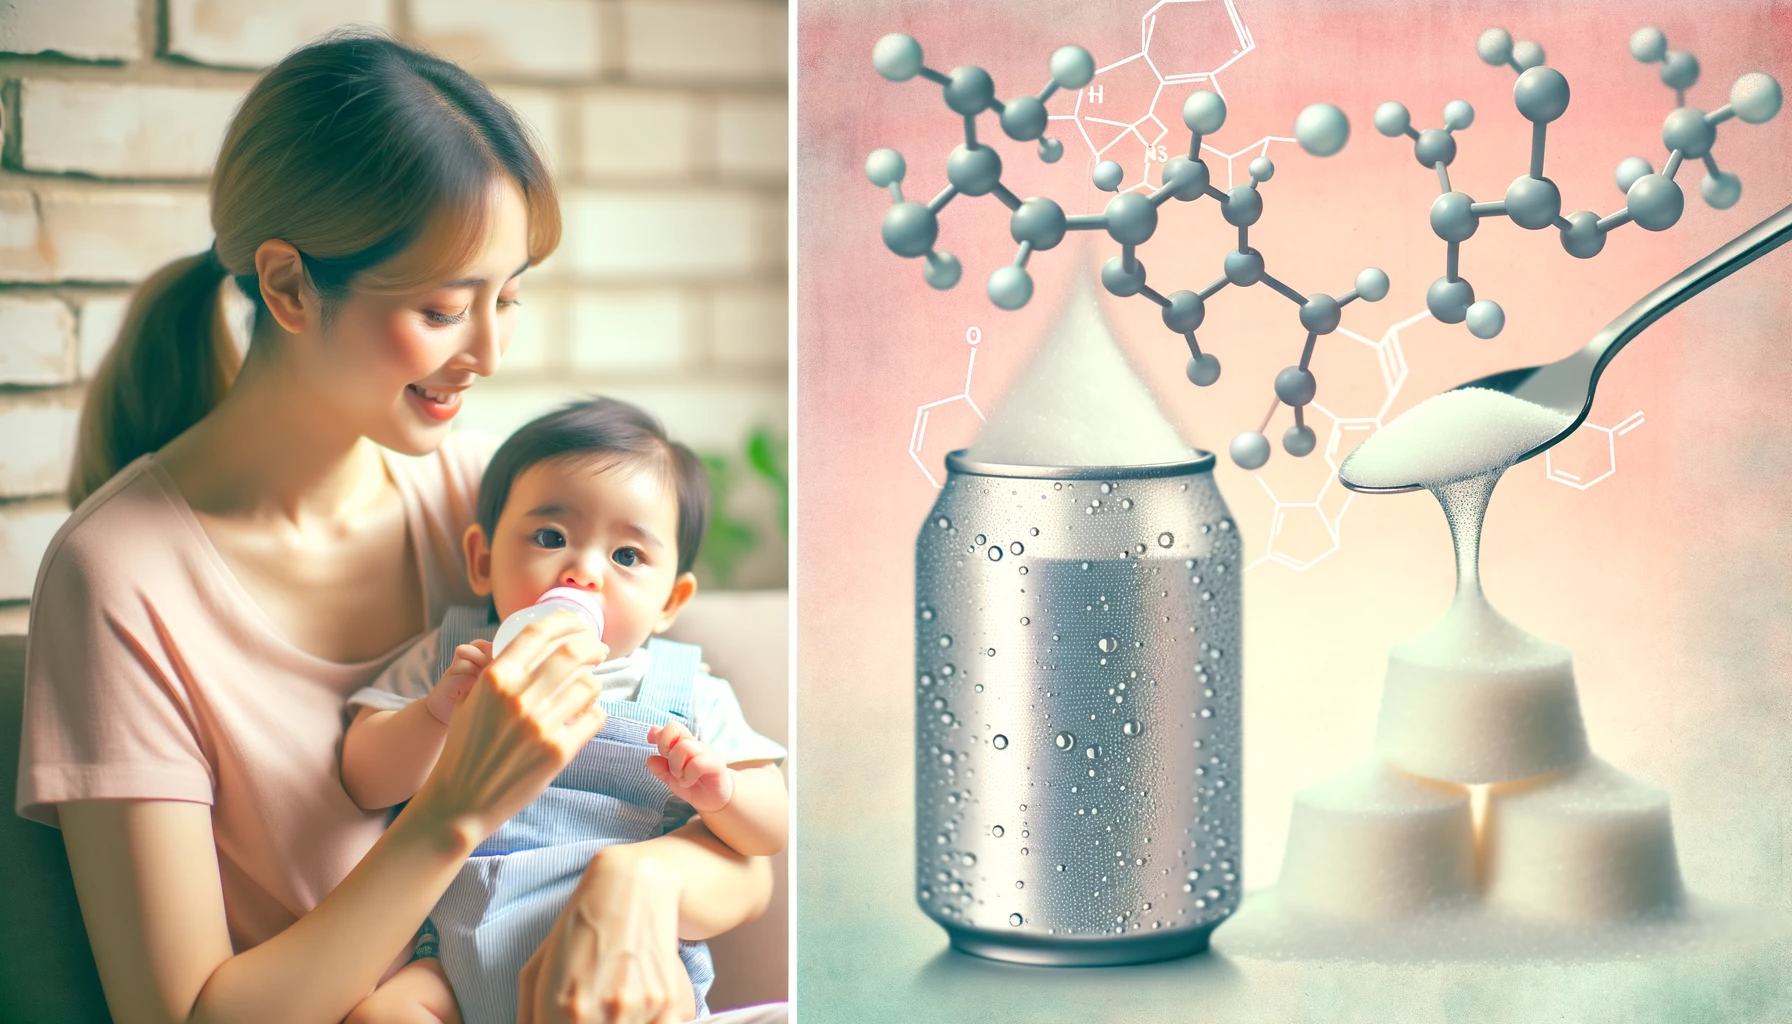 Study: The MILK study: Investigating intergenerational transmission of low-calorie sweeteners in breast milk. Image Credit: Created with the assistance of DALL·E 3